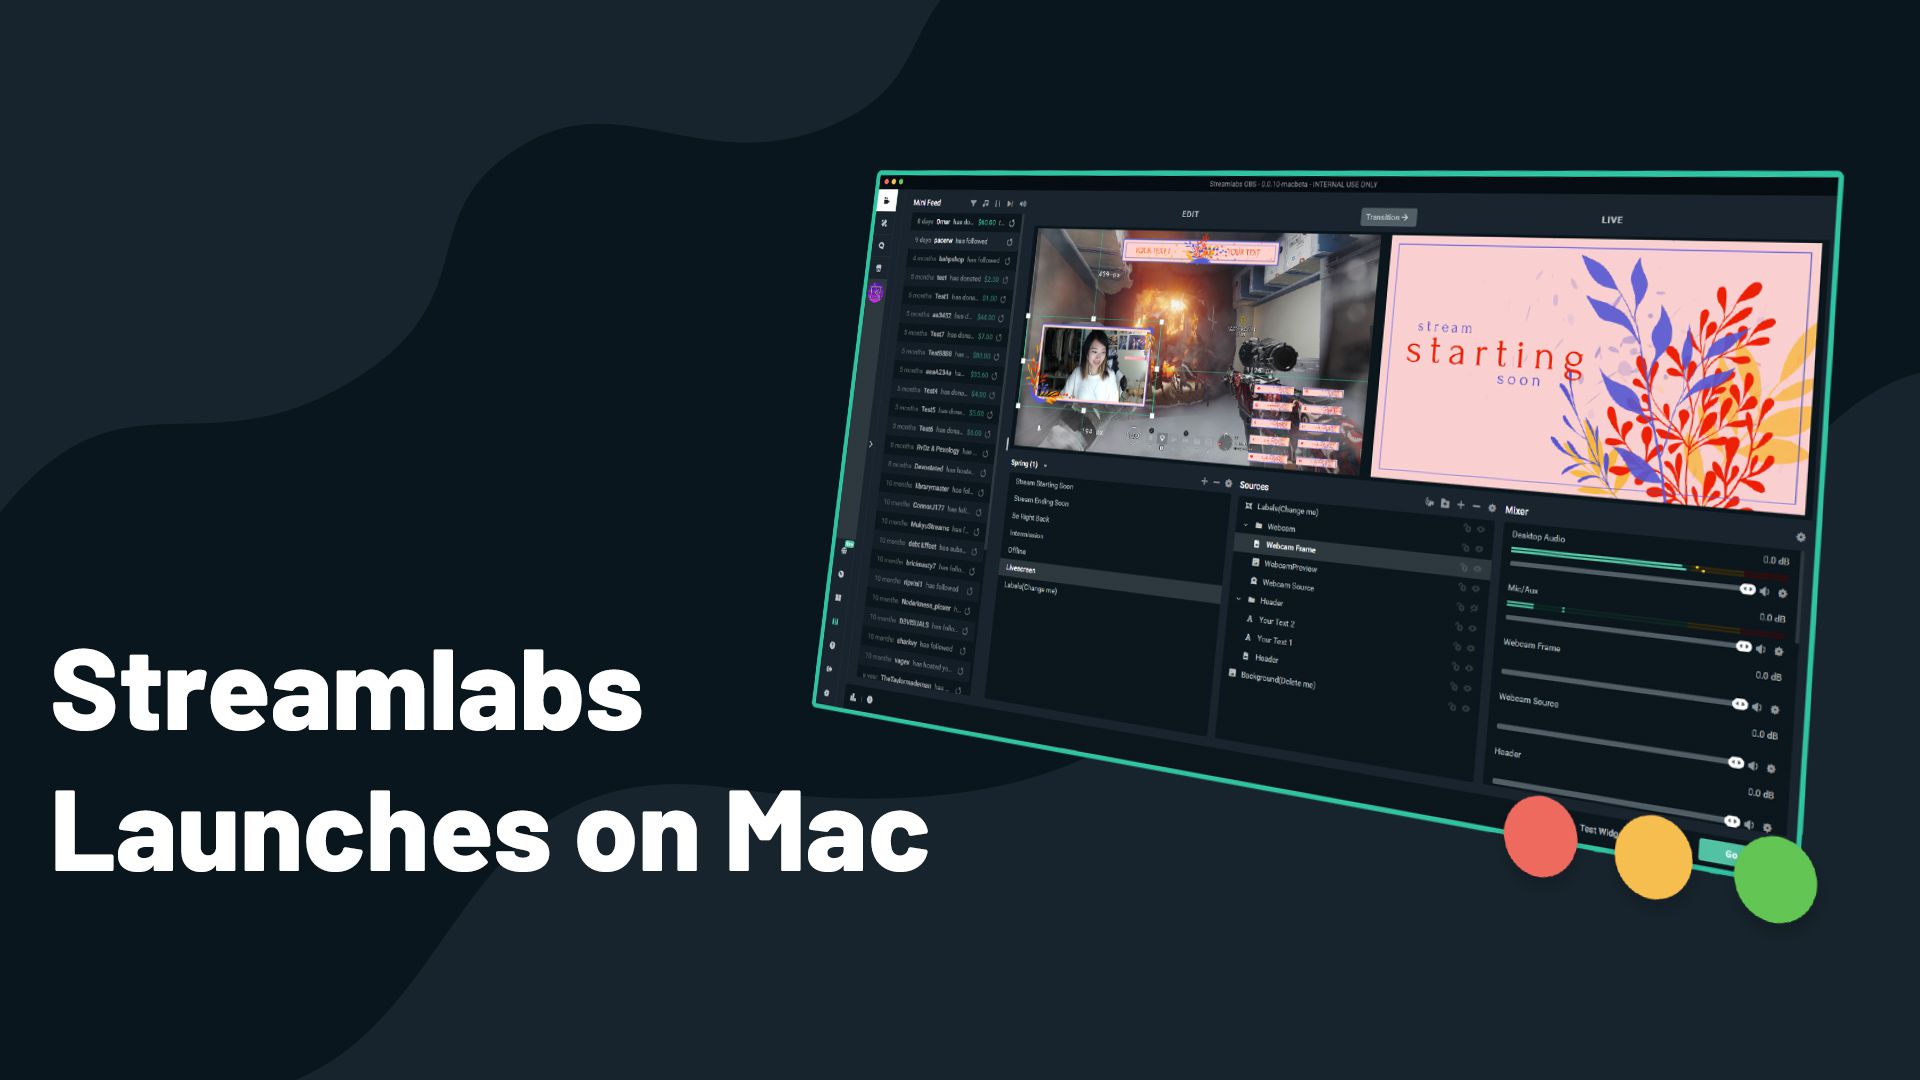 streaming software for youtube mac